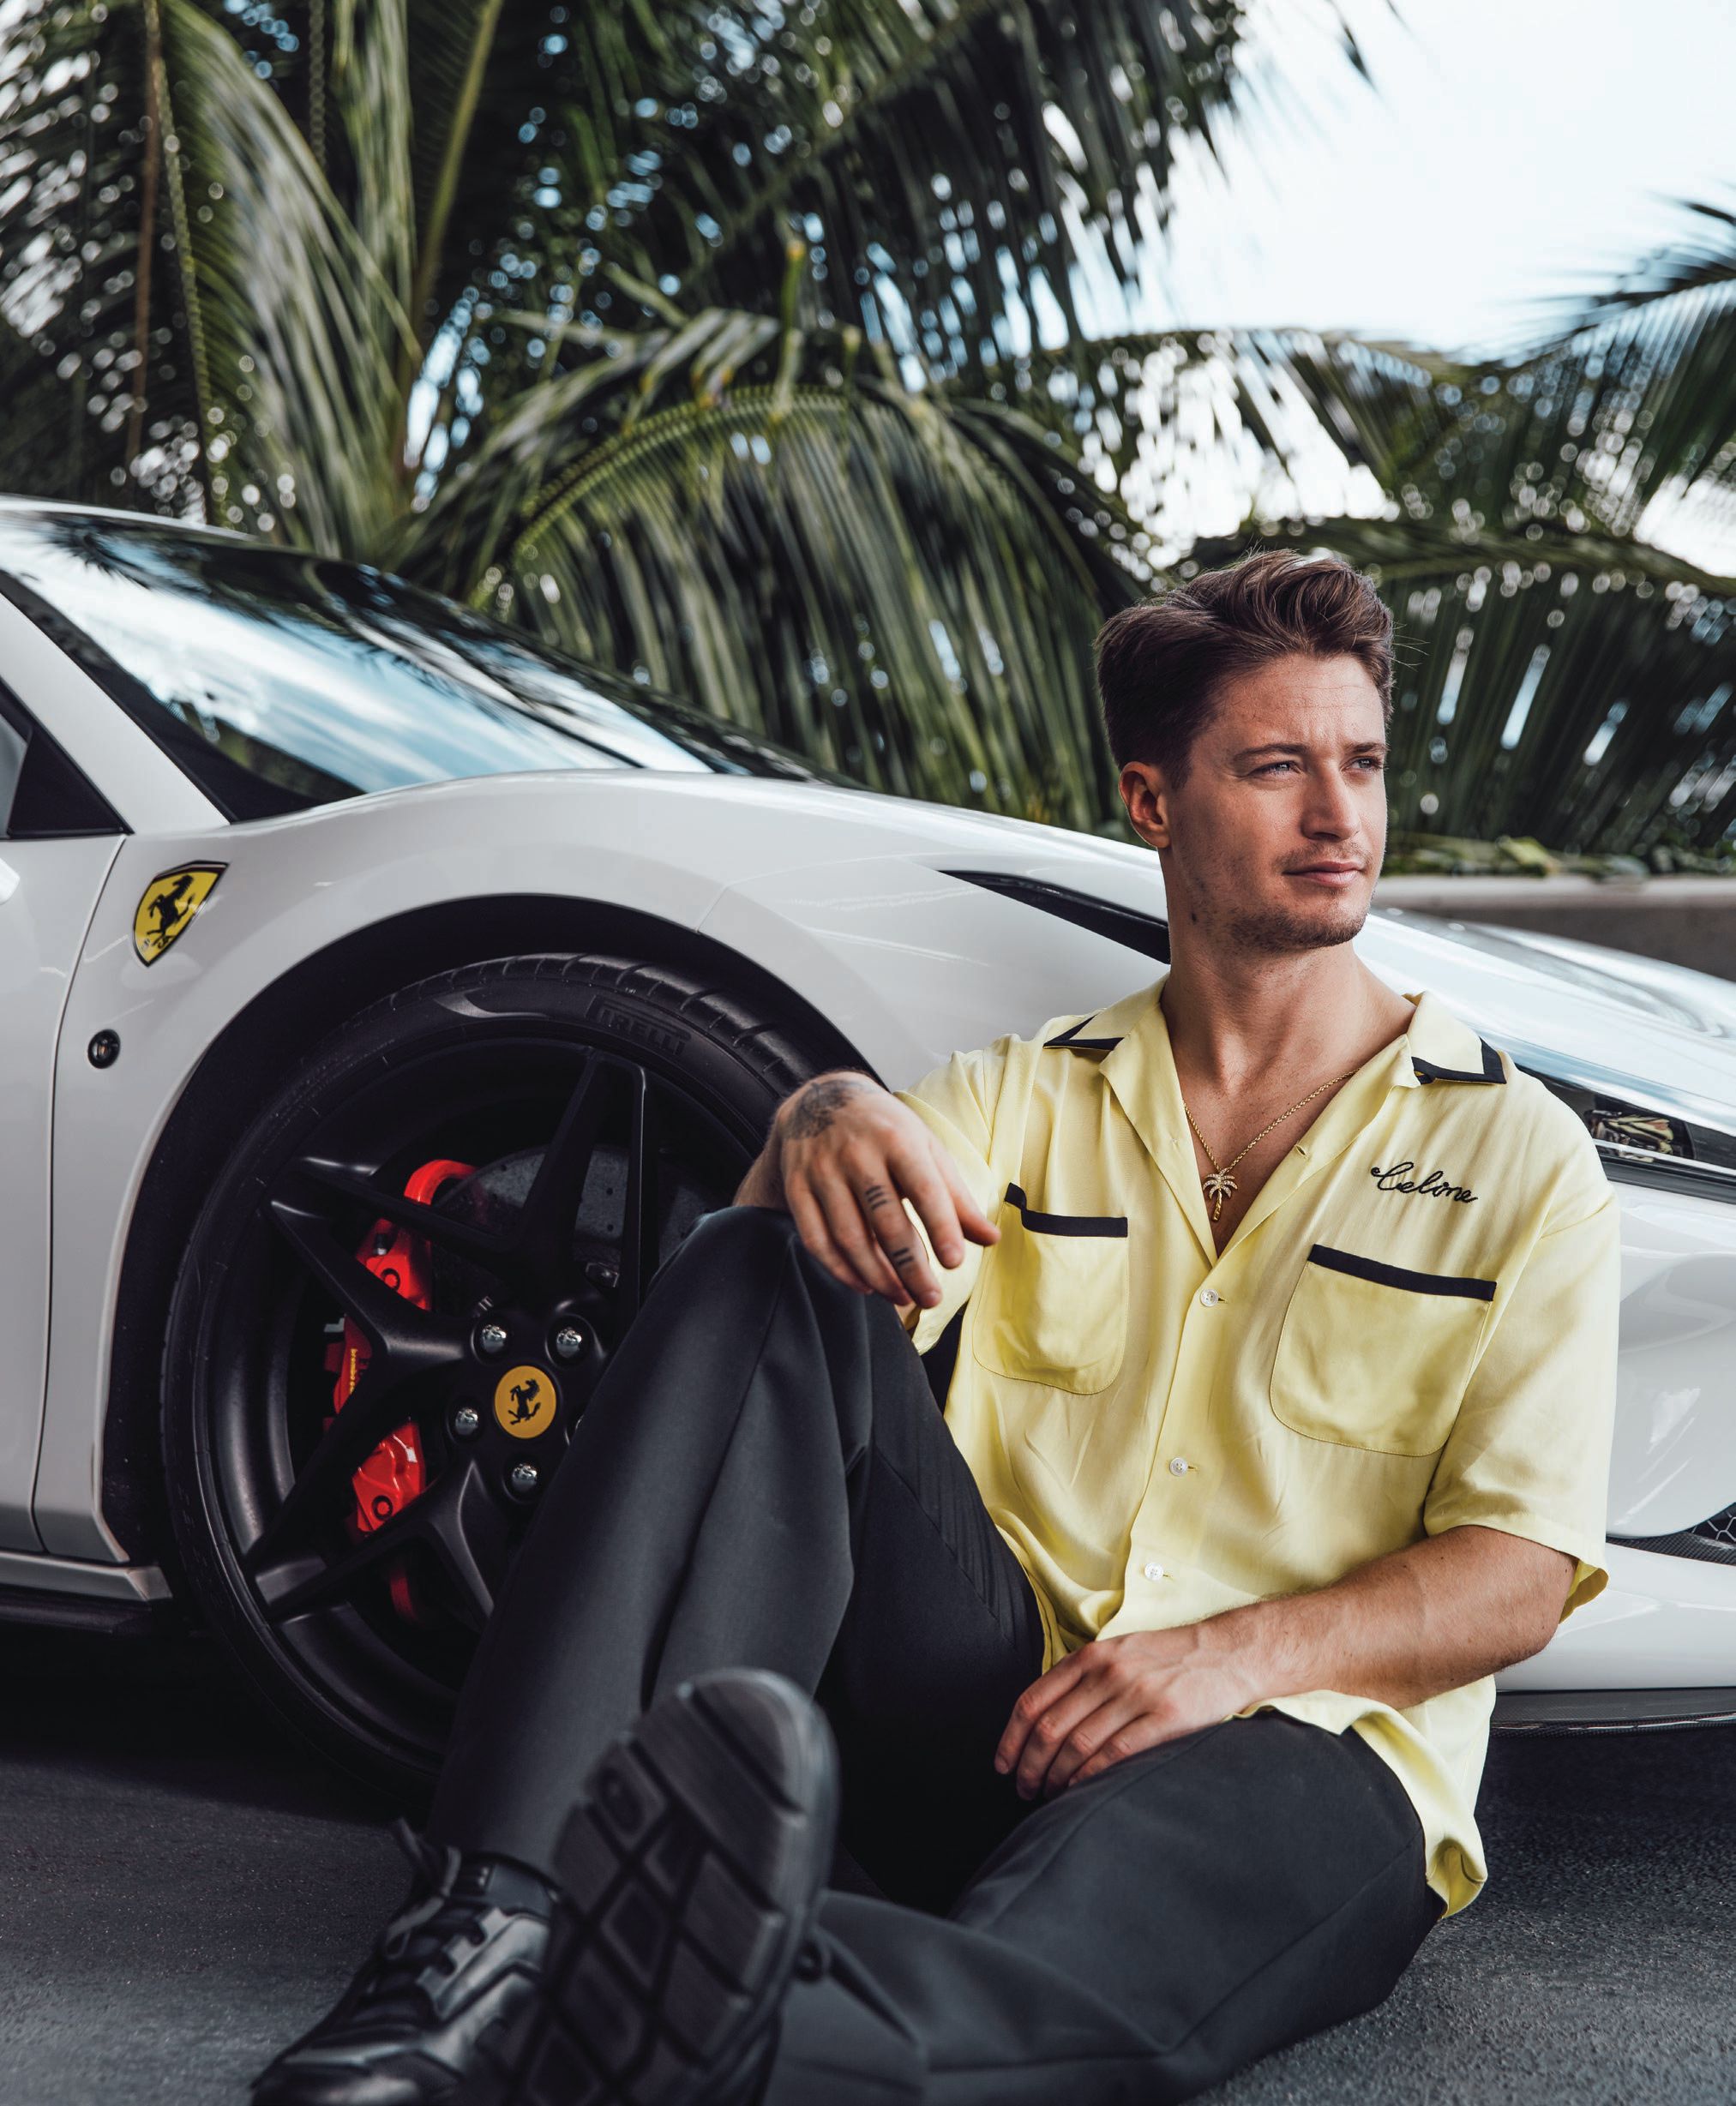 Celine full look, Prada sneakers, thewebster.com; Kygo’s own necklace. PHOTOGRAPHED BY JOHANNES LOVUND | STYLED BY MANUELA GUTIERREZ
GROOMING BY CESAR FERRETTE USING DIOR BEAUTY | SHOT ON SITE AT HARD ROCK STADIUM